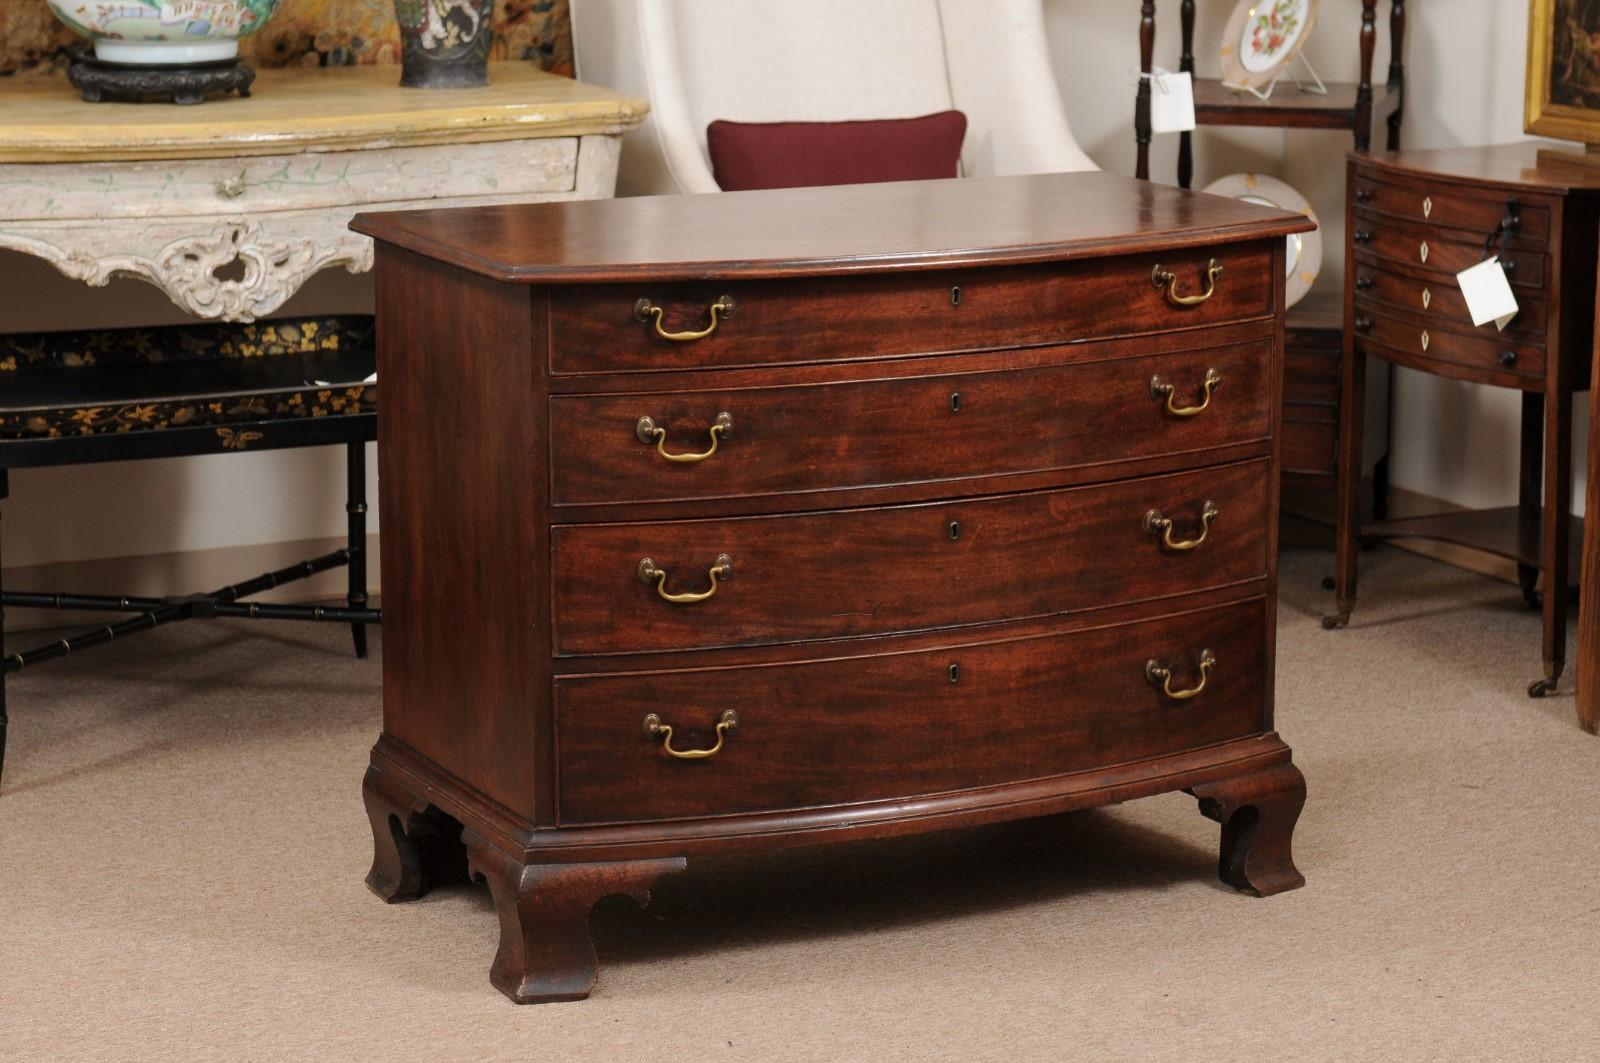 18th Century American Bowfront Chest with 4 Graduating Drawers & Ogee Feet
